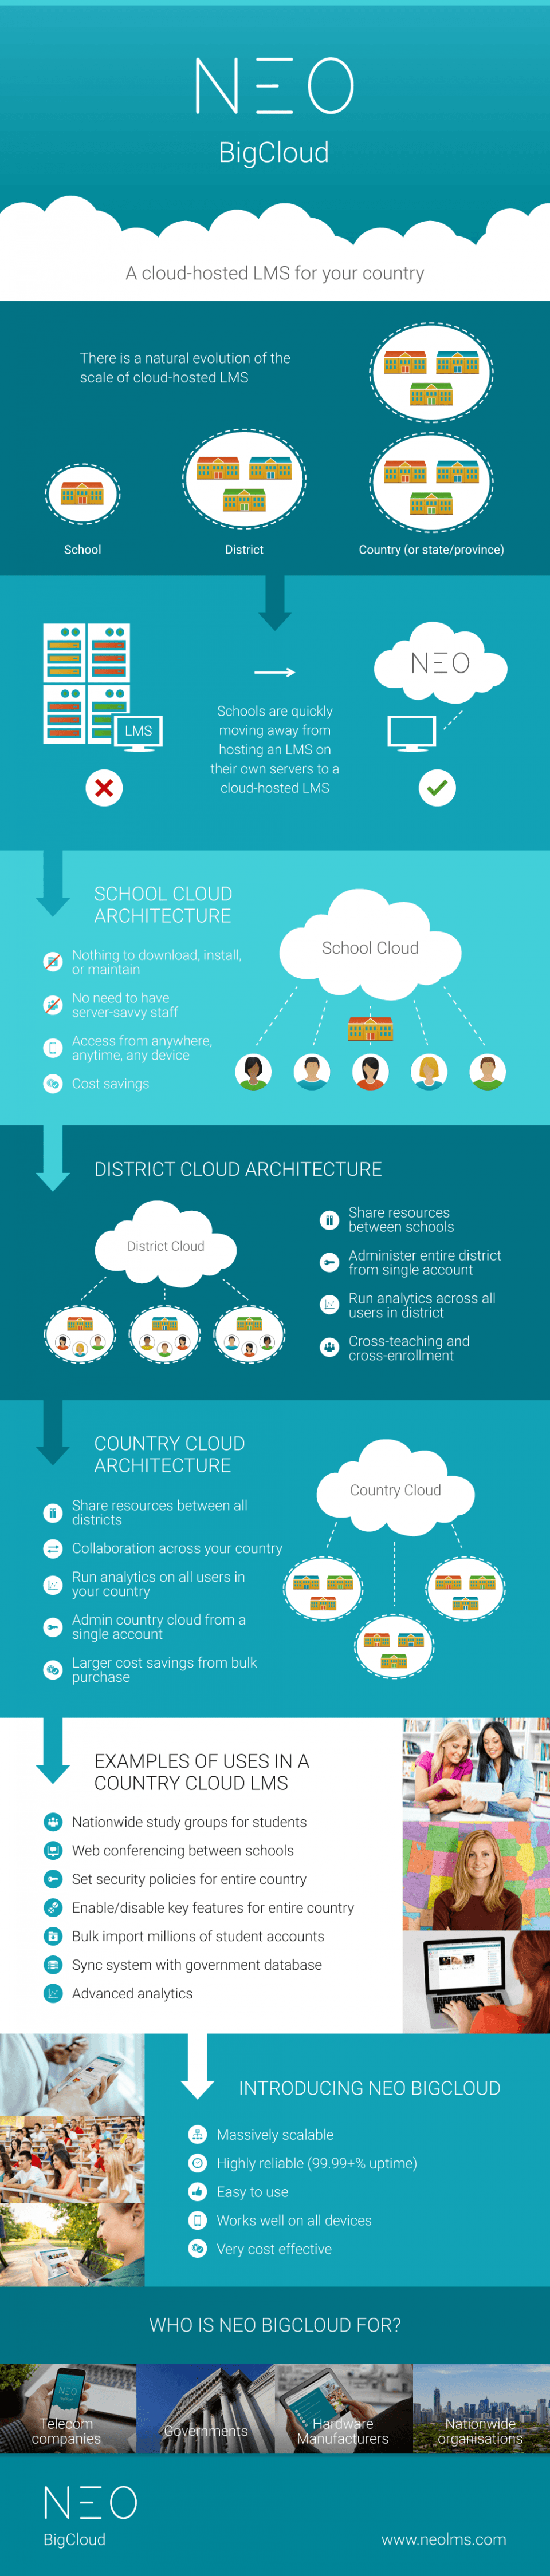 Cloud-hosted LMS Infographic